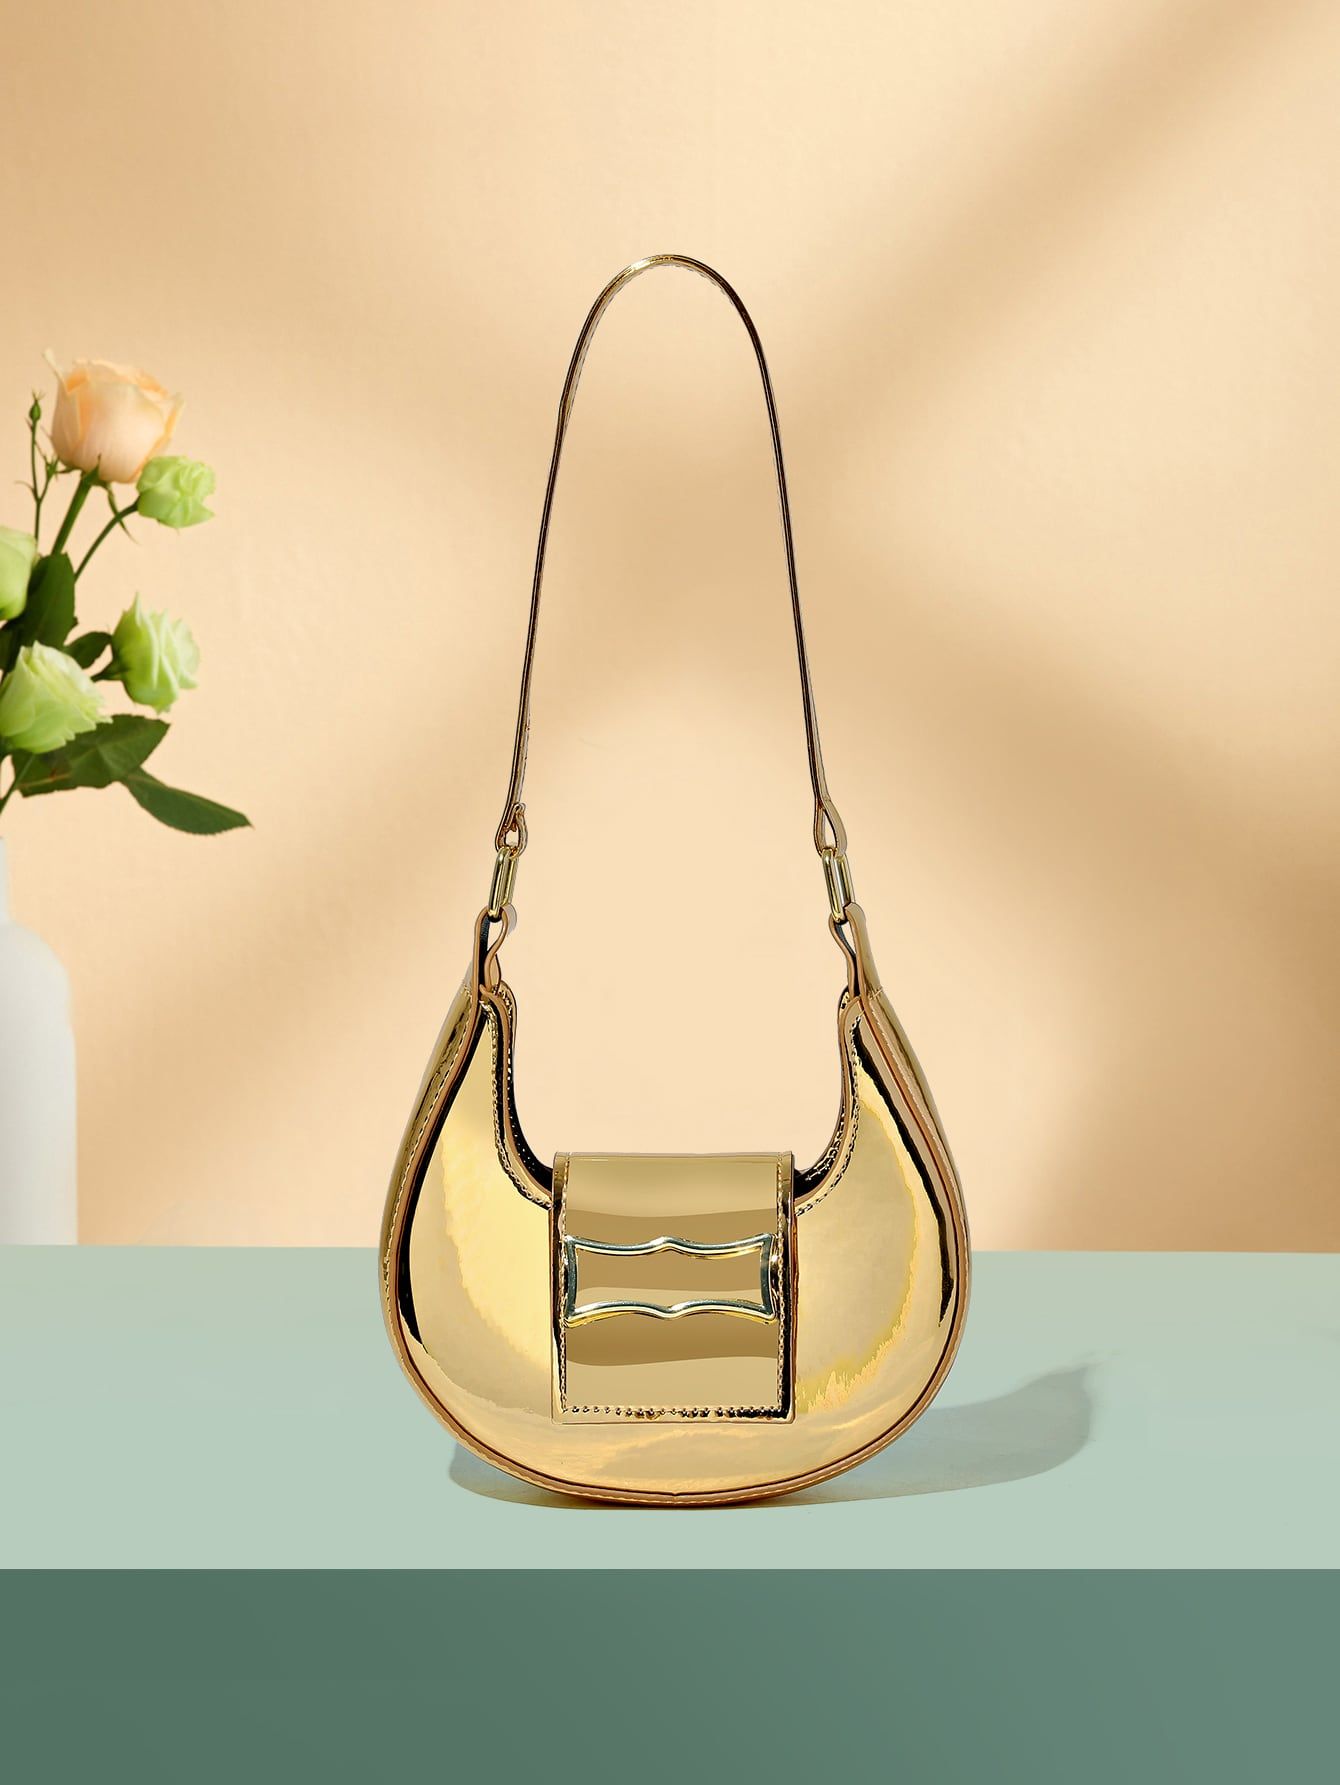 New Arrival Fashionable Single Shoulder Bag With Metallic Decoration | SHEIN